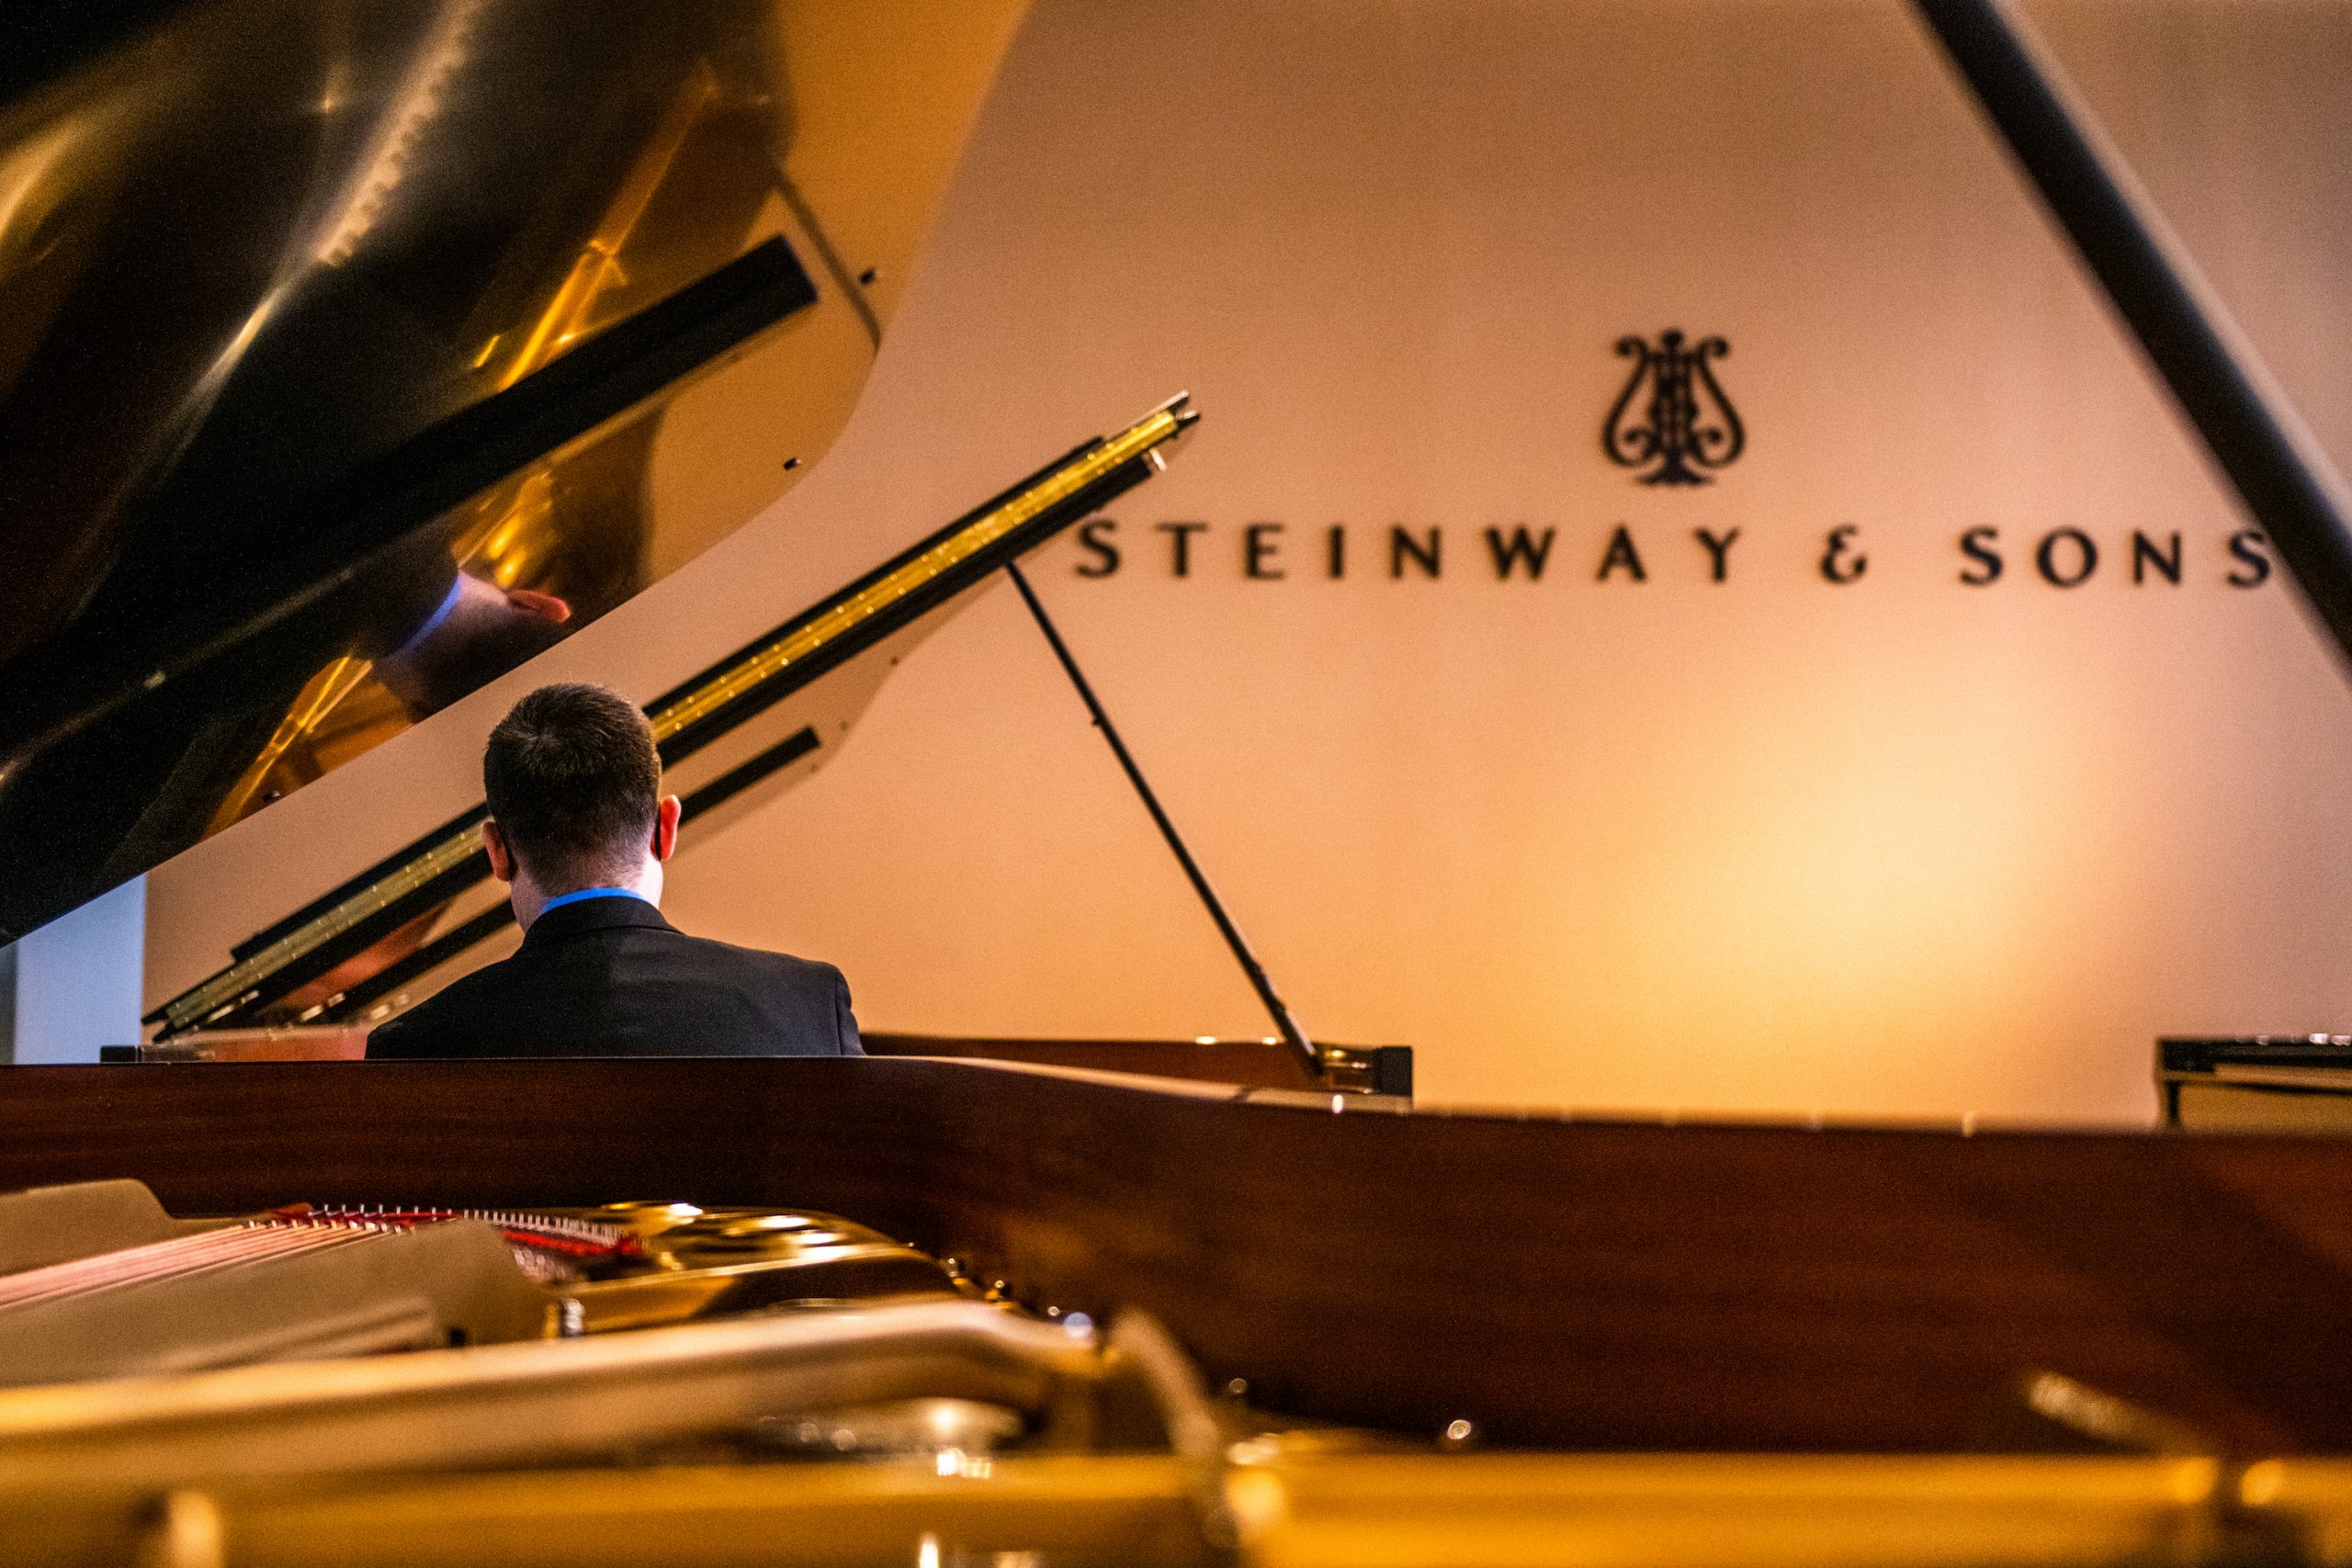 Playing a Steinway & Sons piano